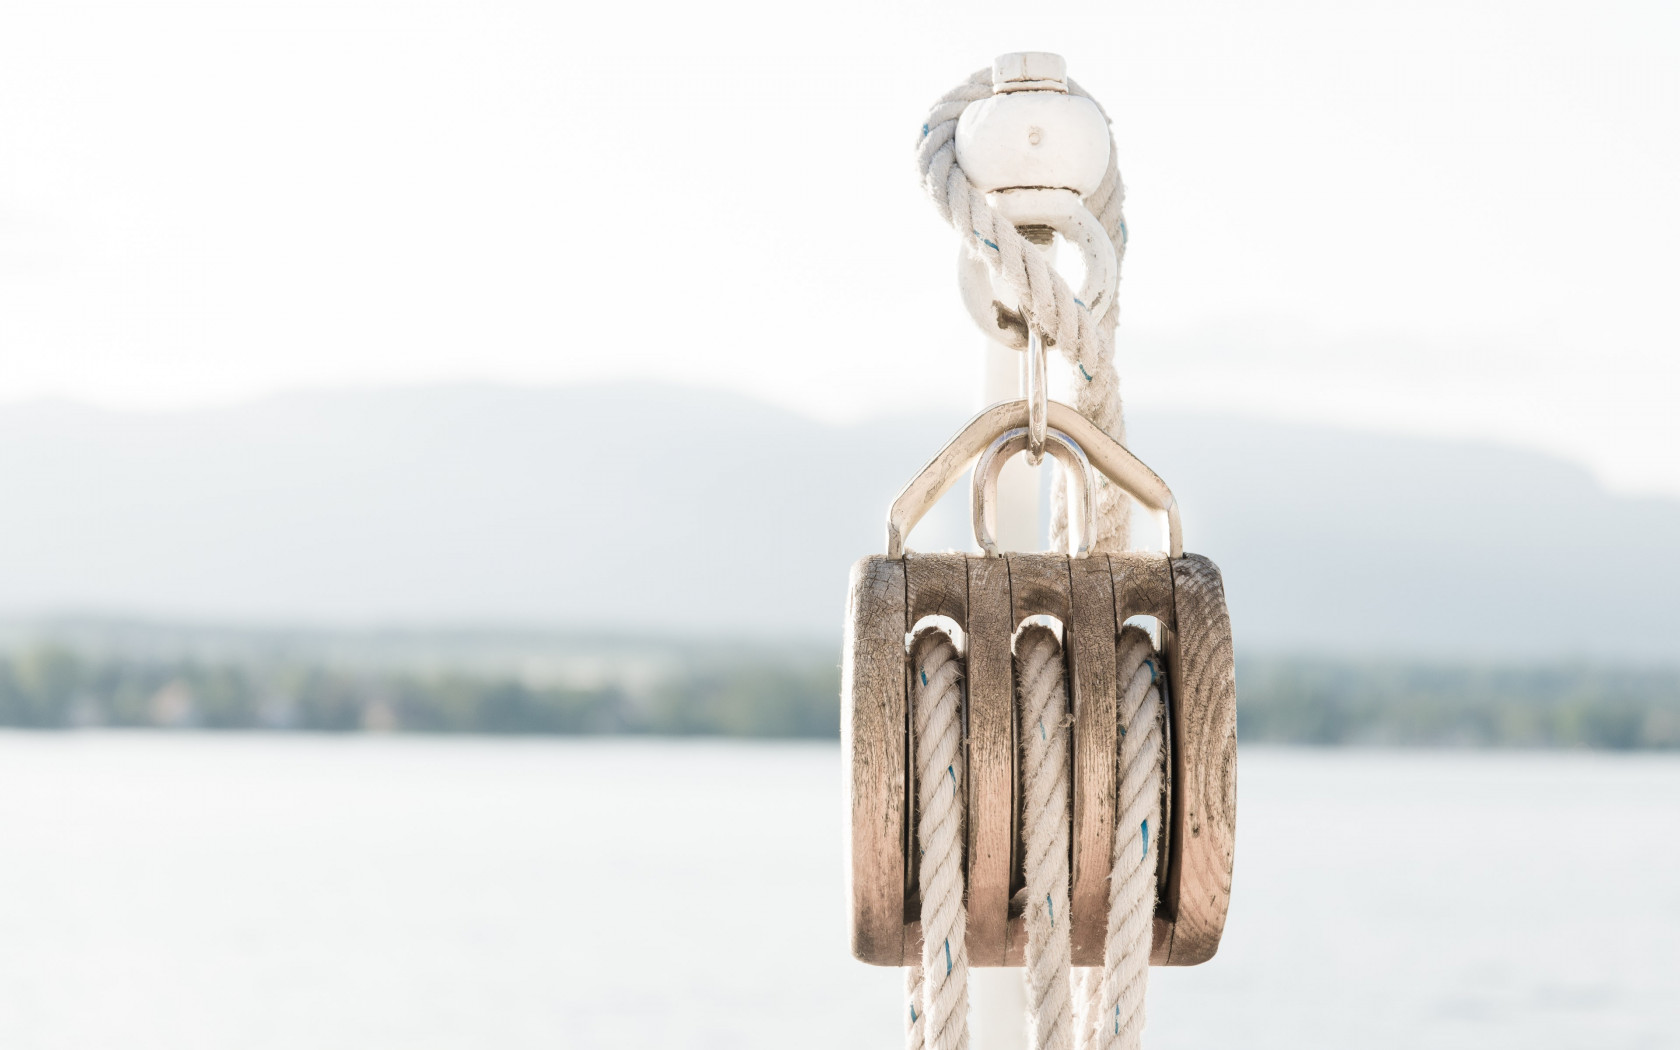 Pulley on a boat wallpaper 1680x1050